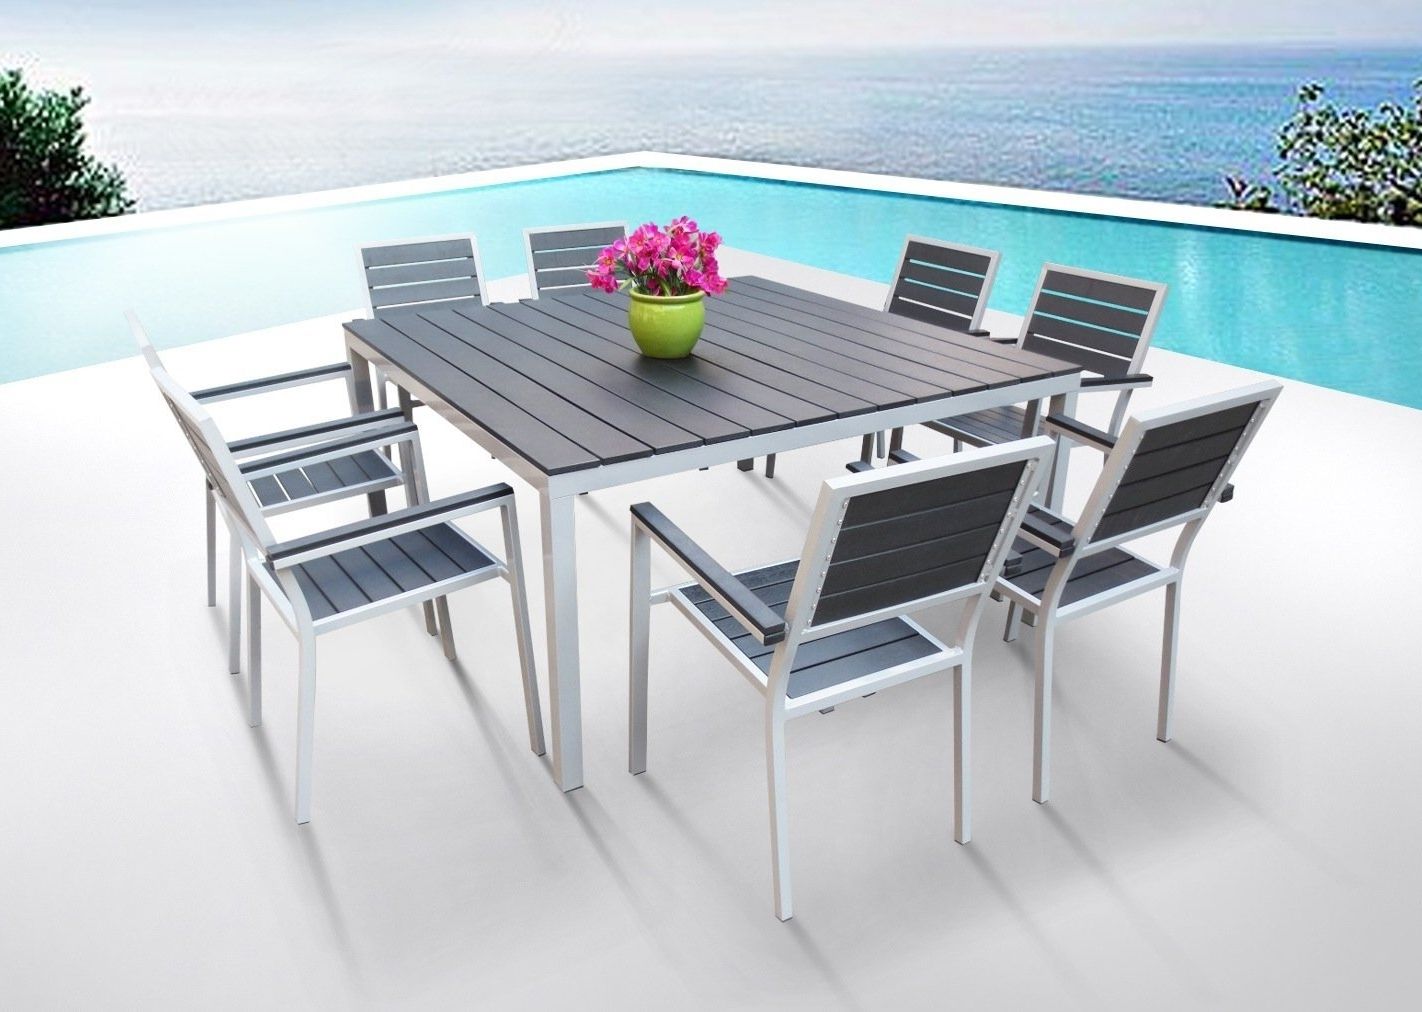 Brushed Stainless Steel Outdoor Tables For Well Liked Stainless Steel Outdoor Furniture – Ideas On Foter (View 12 of 15)